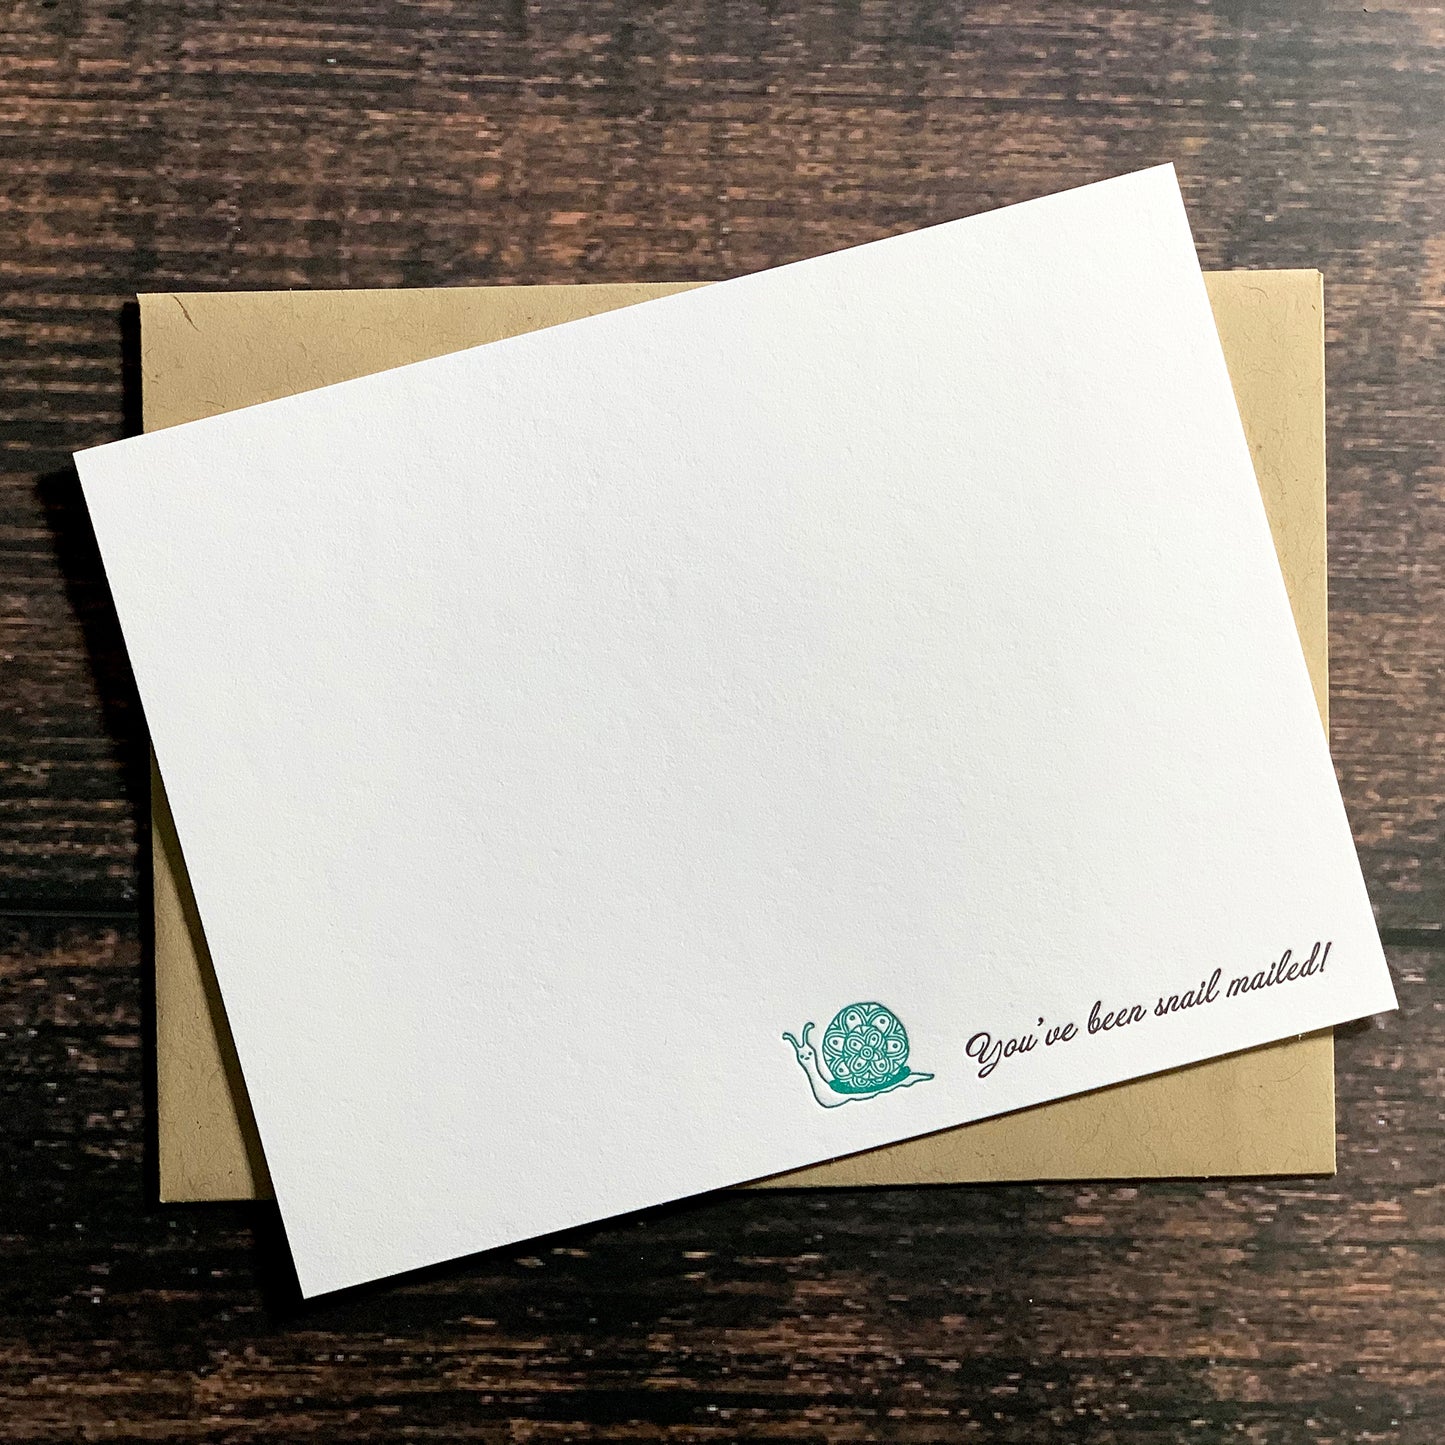 You've been snail mailed! note card with envelope, teal snail, letterpress printed